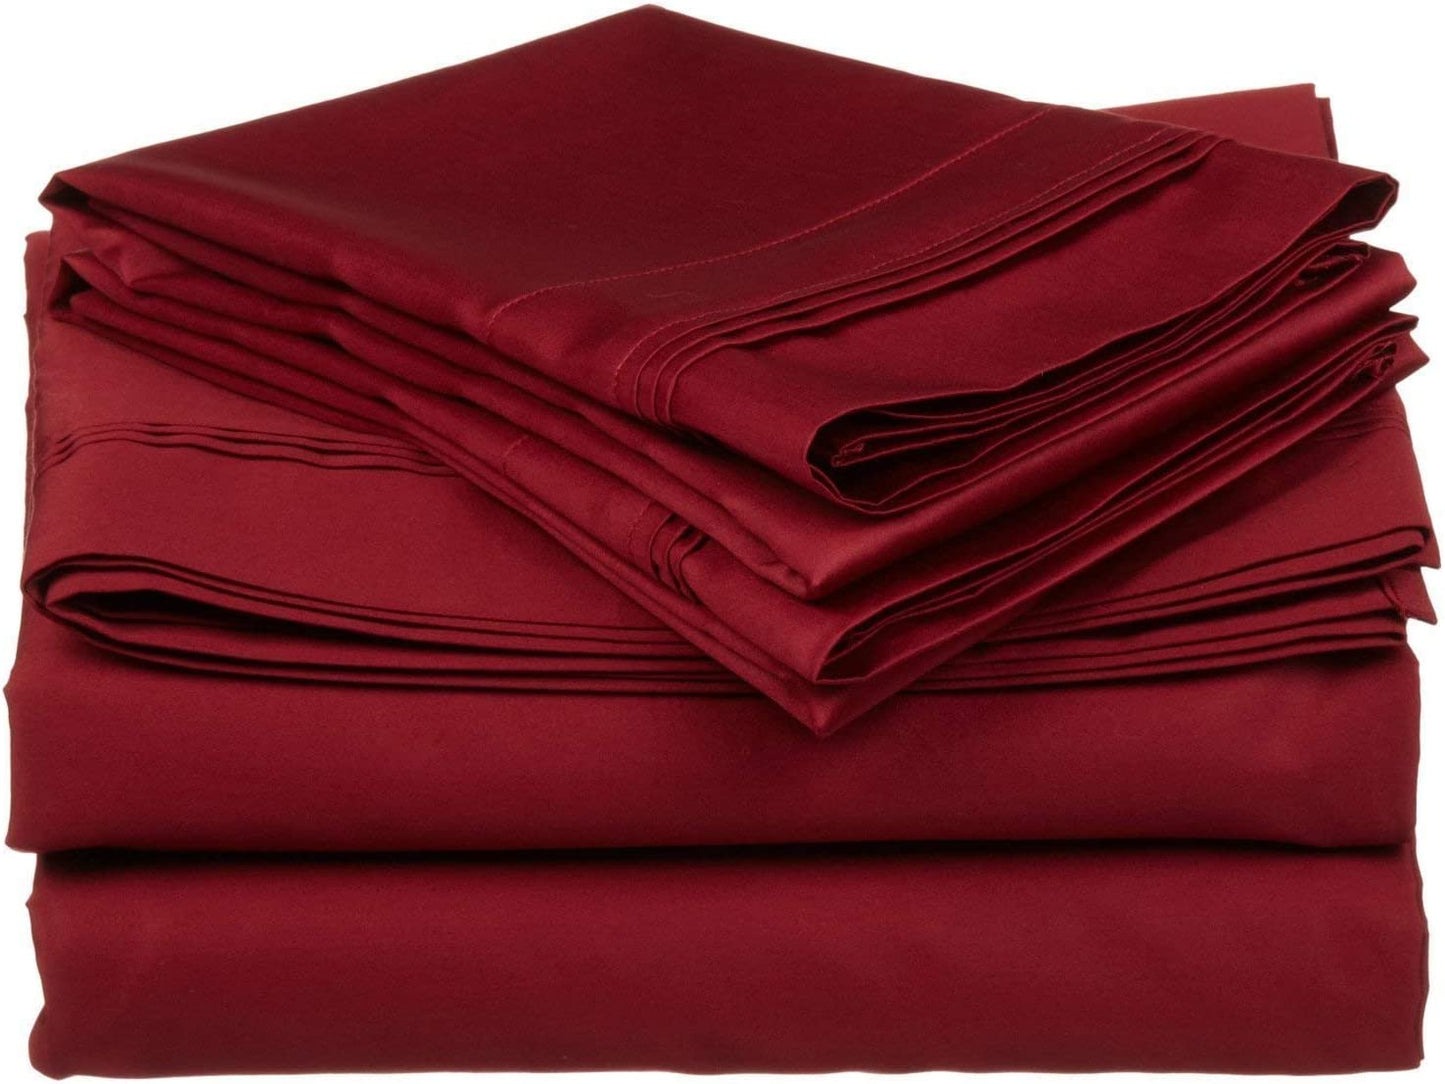 8 Inch Pocket Fitted Sheets Burgundy Long Staple Giza Egyptian Cotton at-EgyptianHomeLinens.com